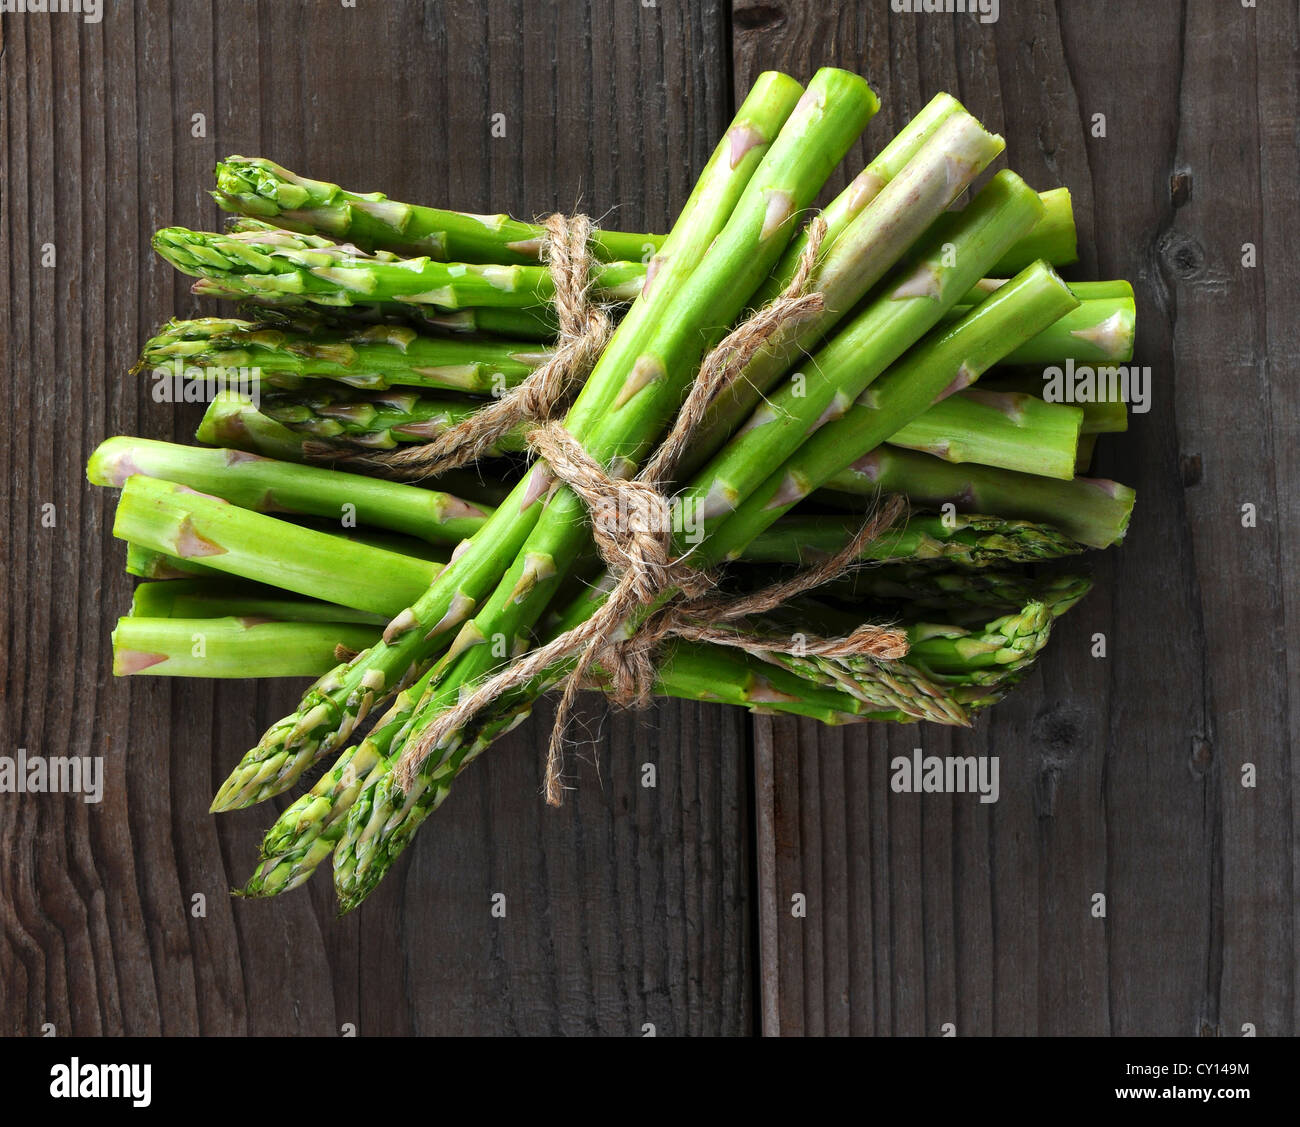 Bunches of asparagus tied with twine on a wood background. Overhead view in horizontal format. Stock Photo